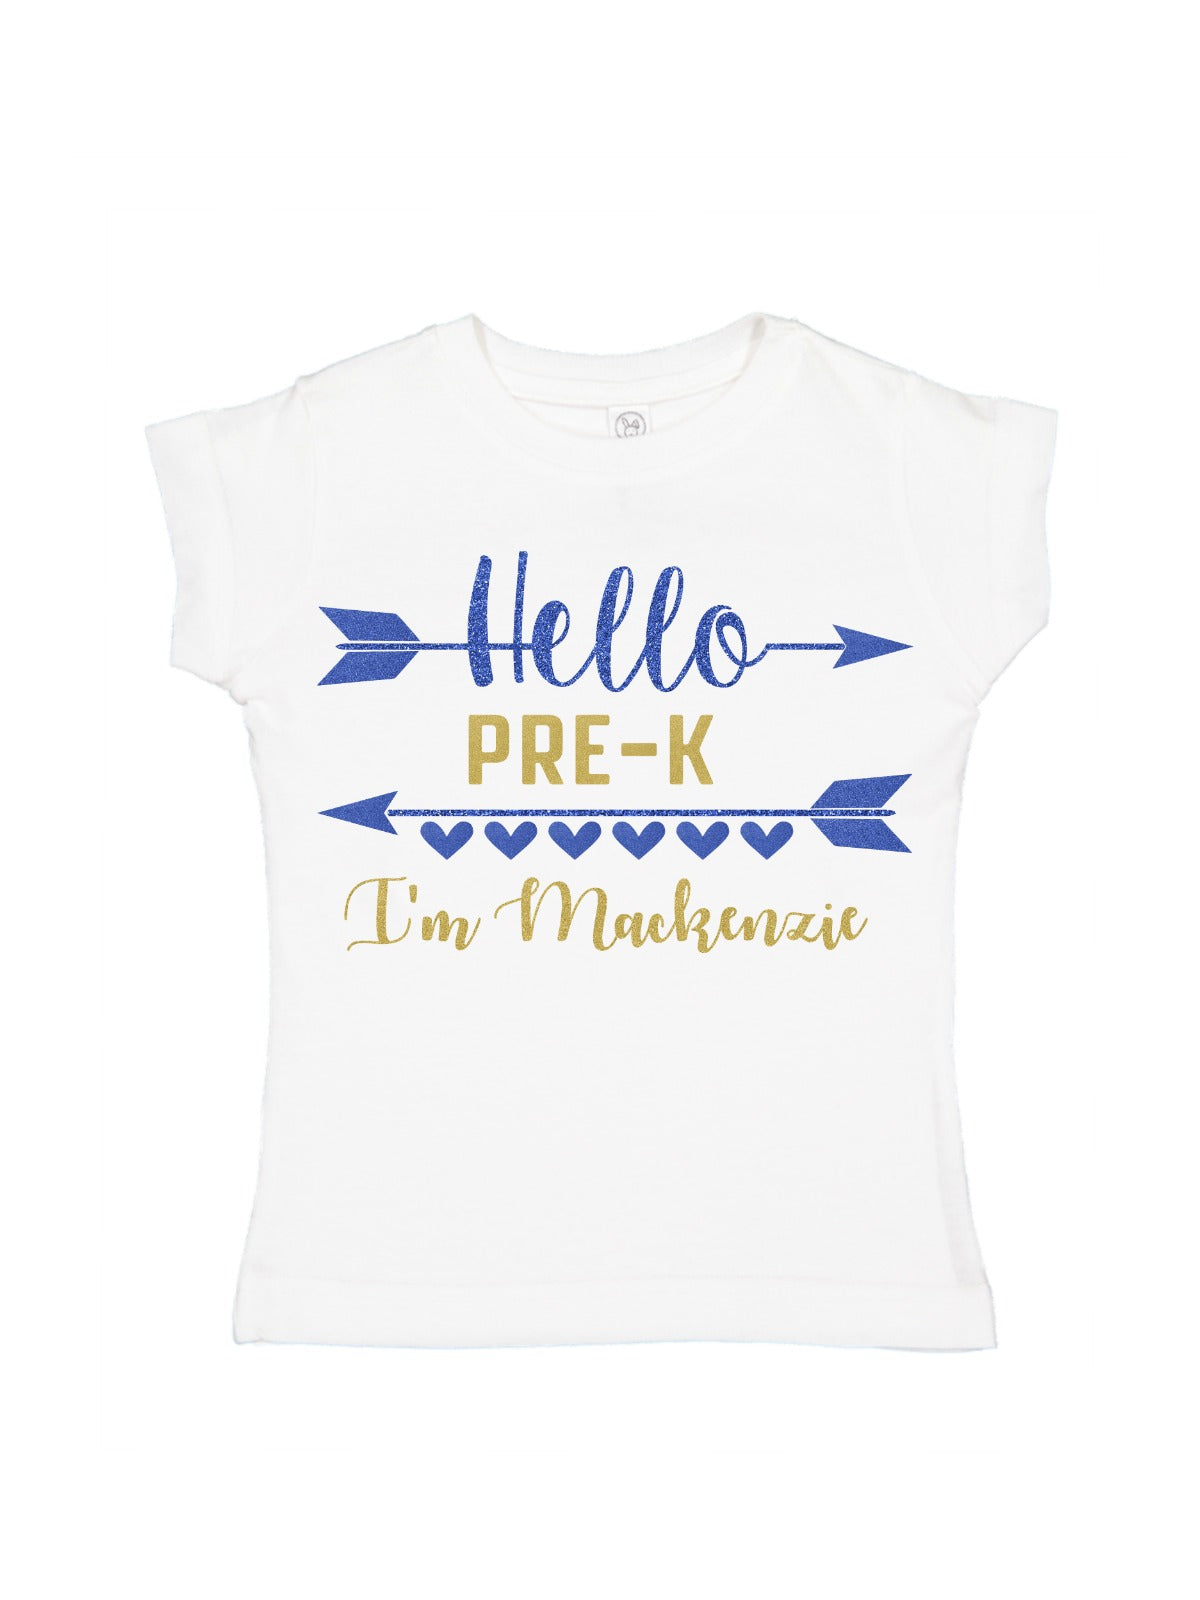 back to school shirt for girls personalized